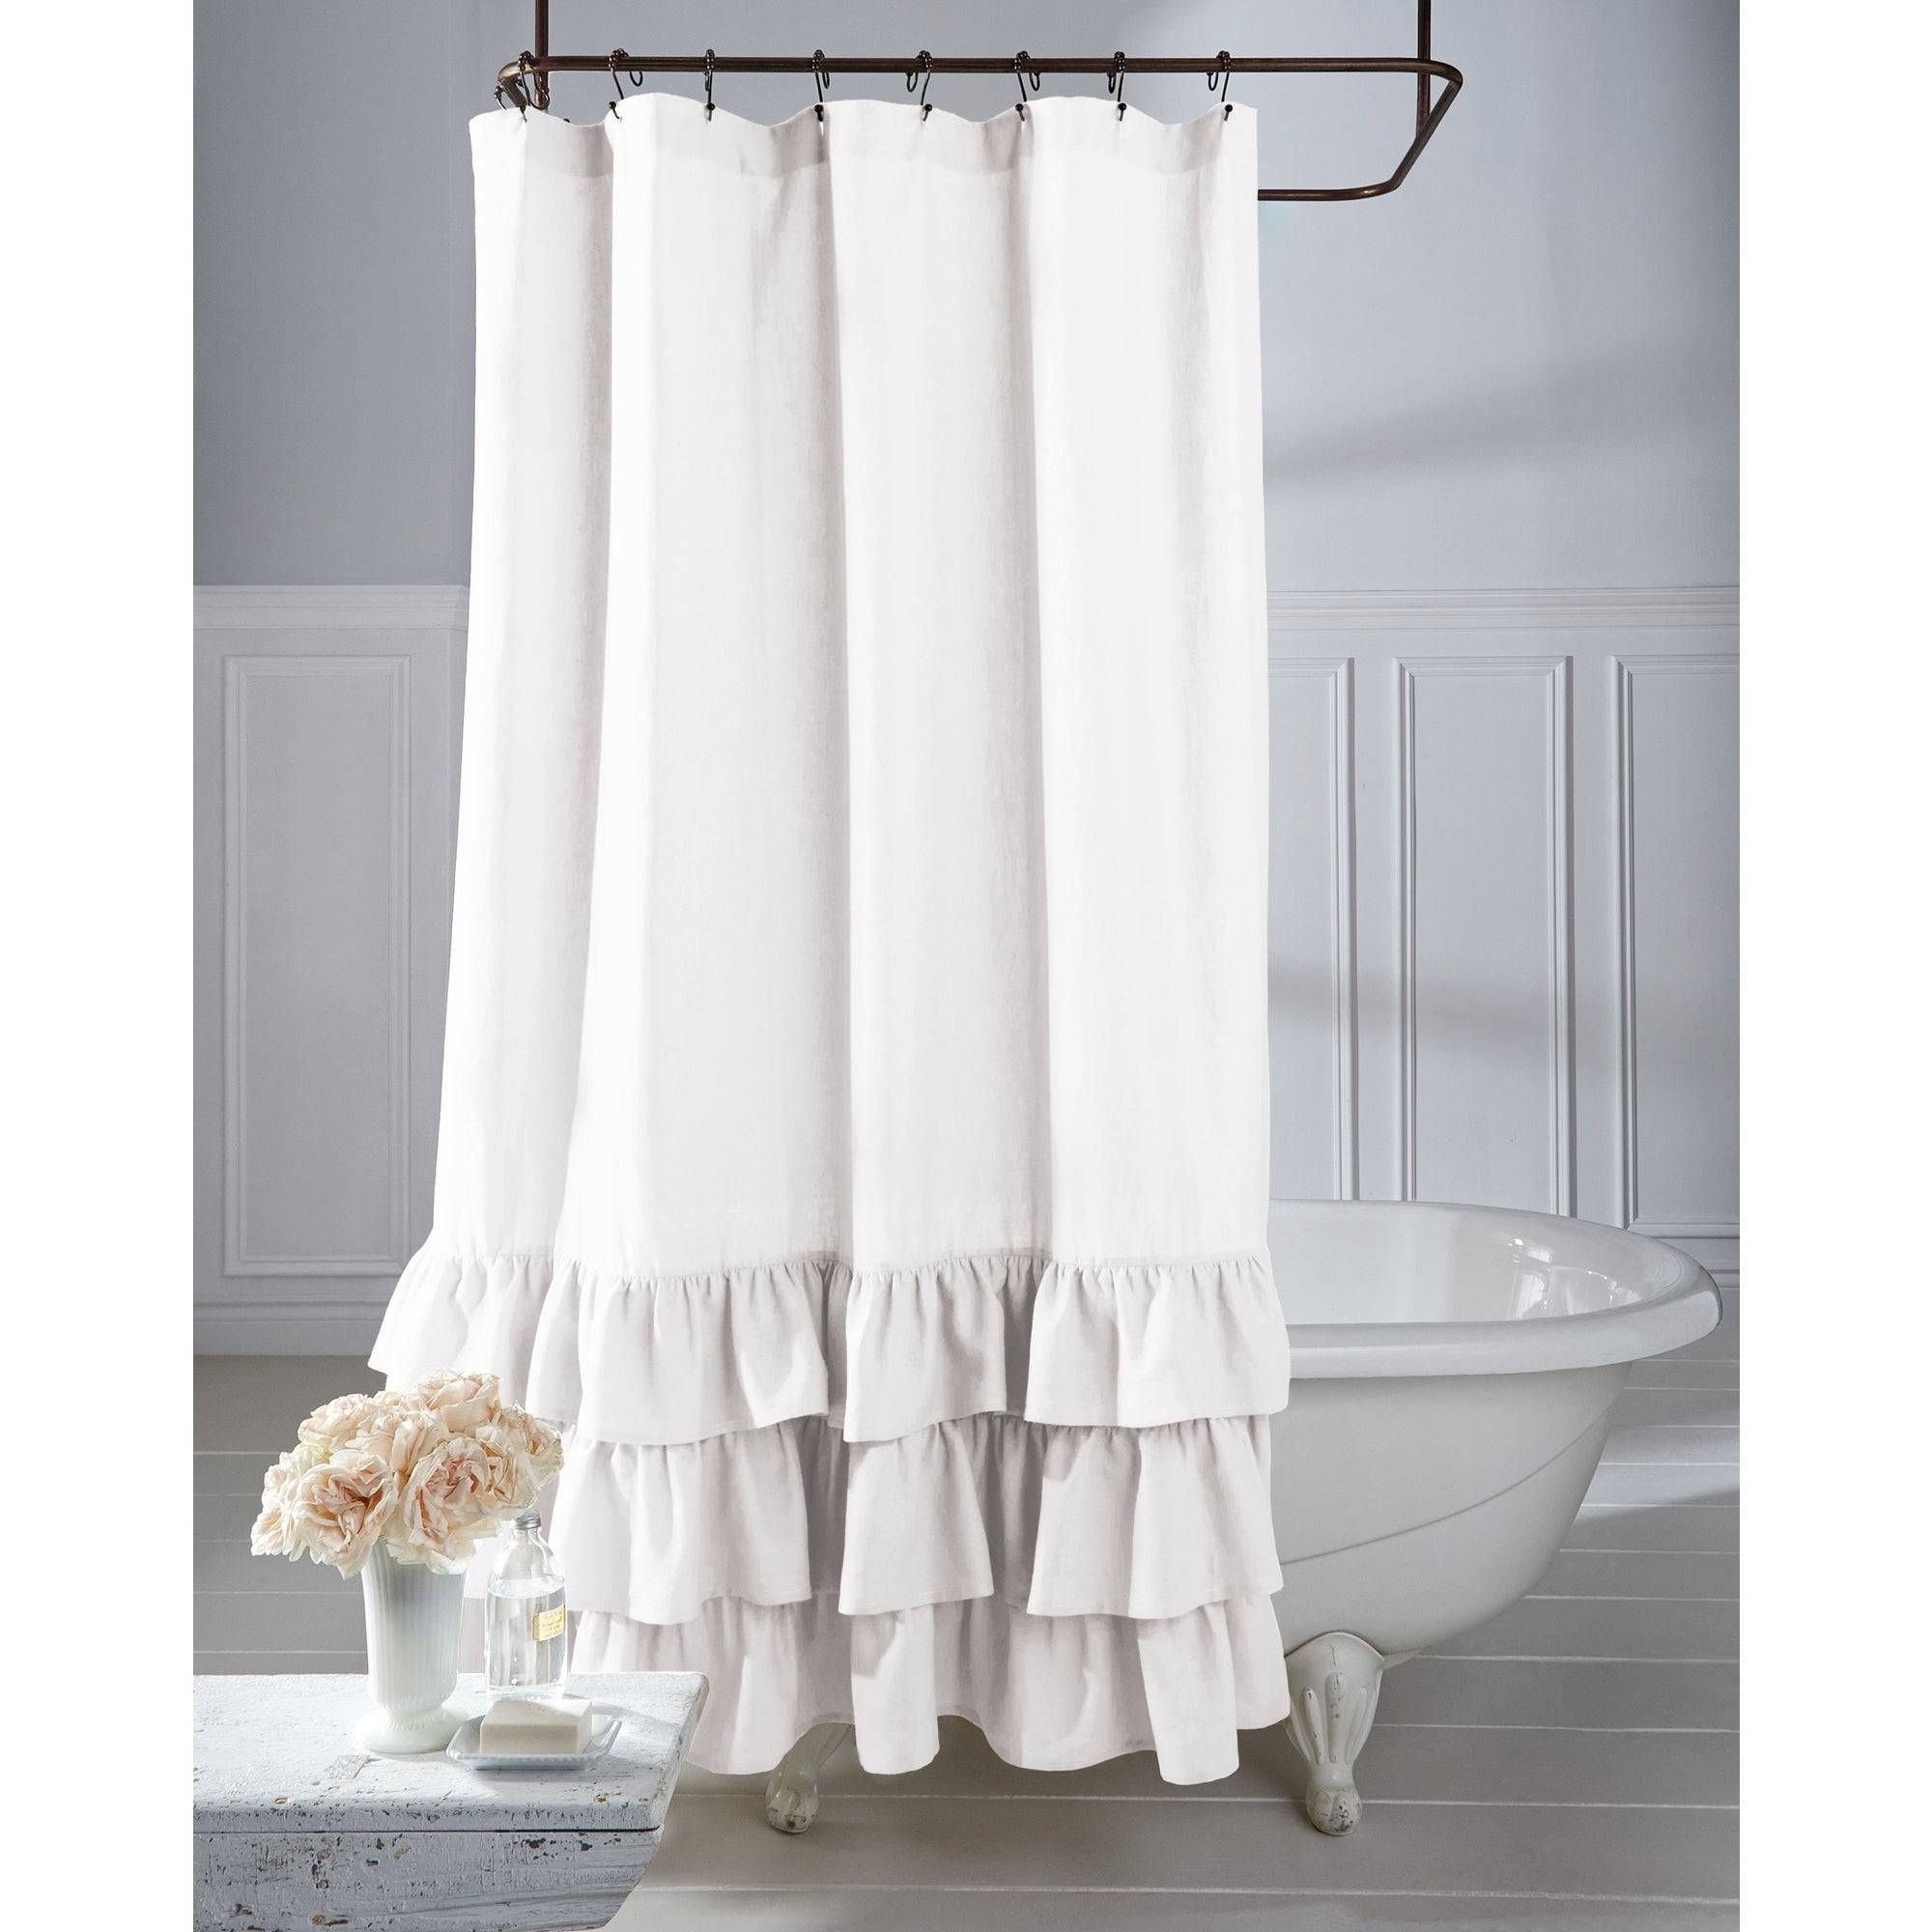 Navy Vertical Ruffled Waterfall Valance And Curtain Tiers With Favorite Fascinating Grey Ruffle Shower Curtain Farmhouse Linen (View 17 of 20)